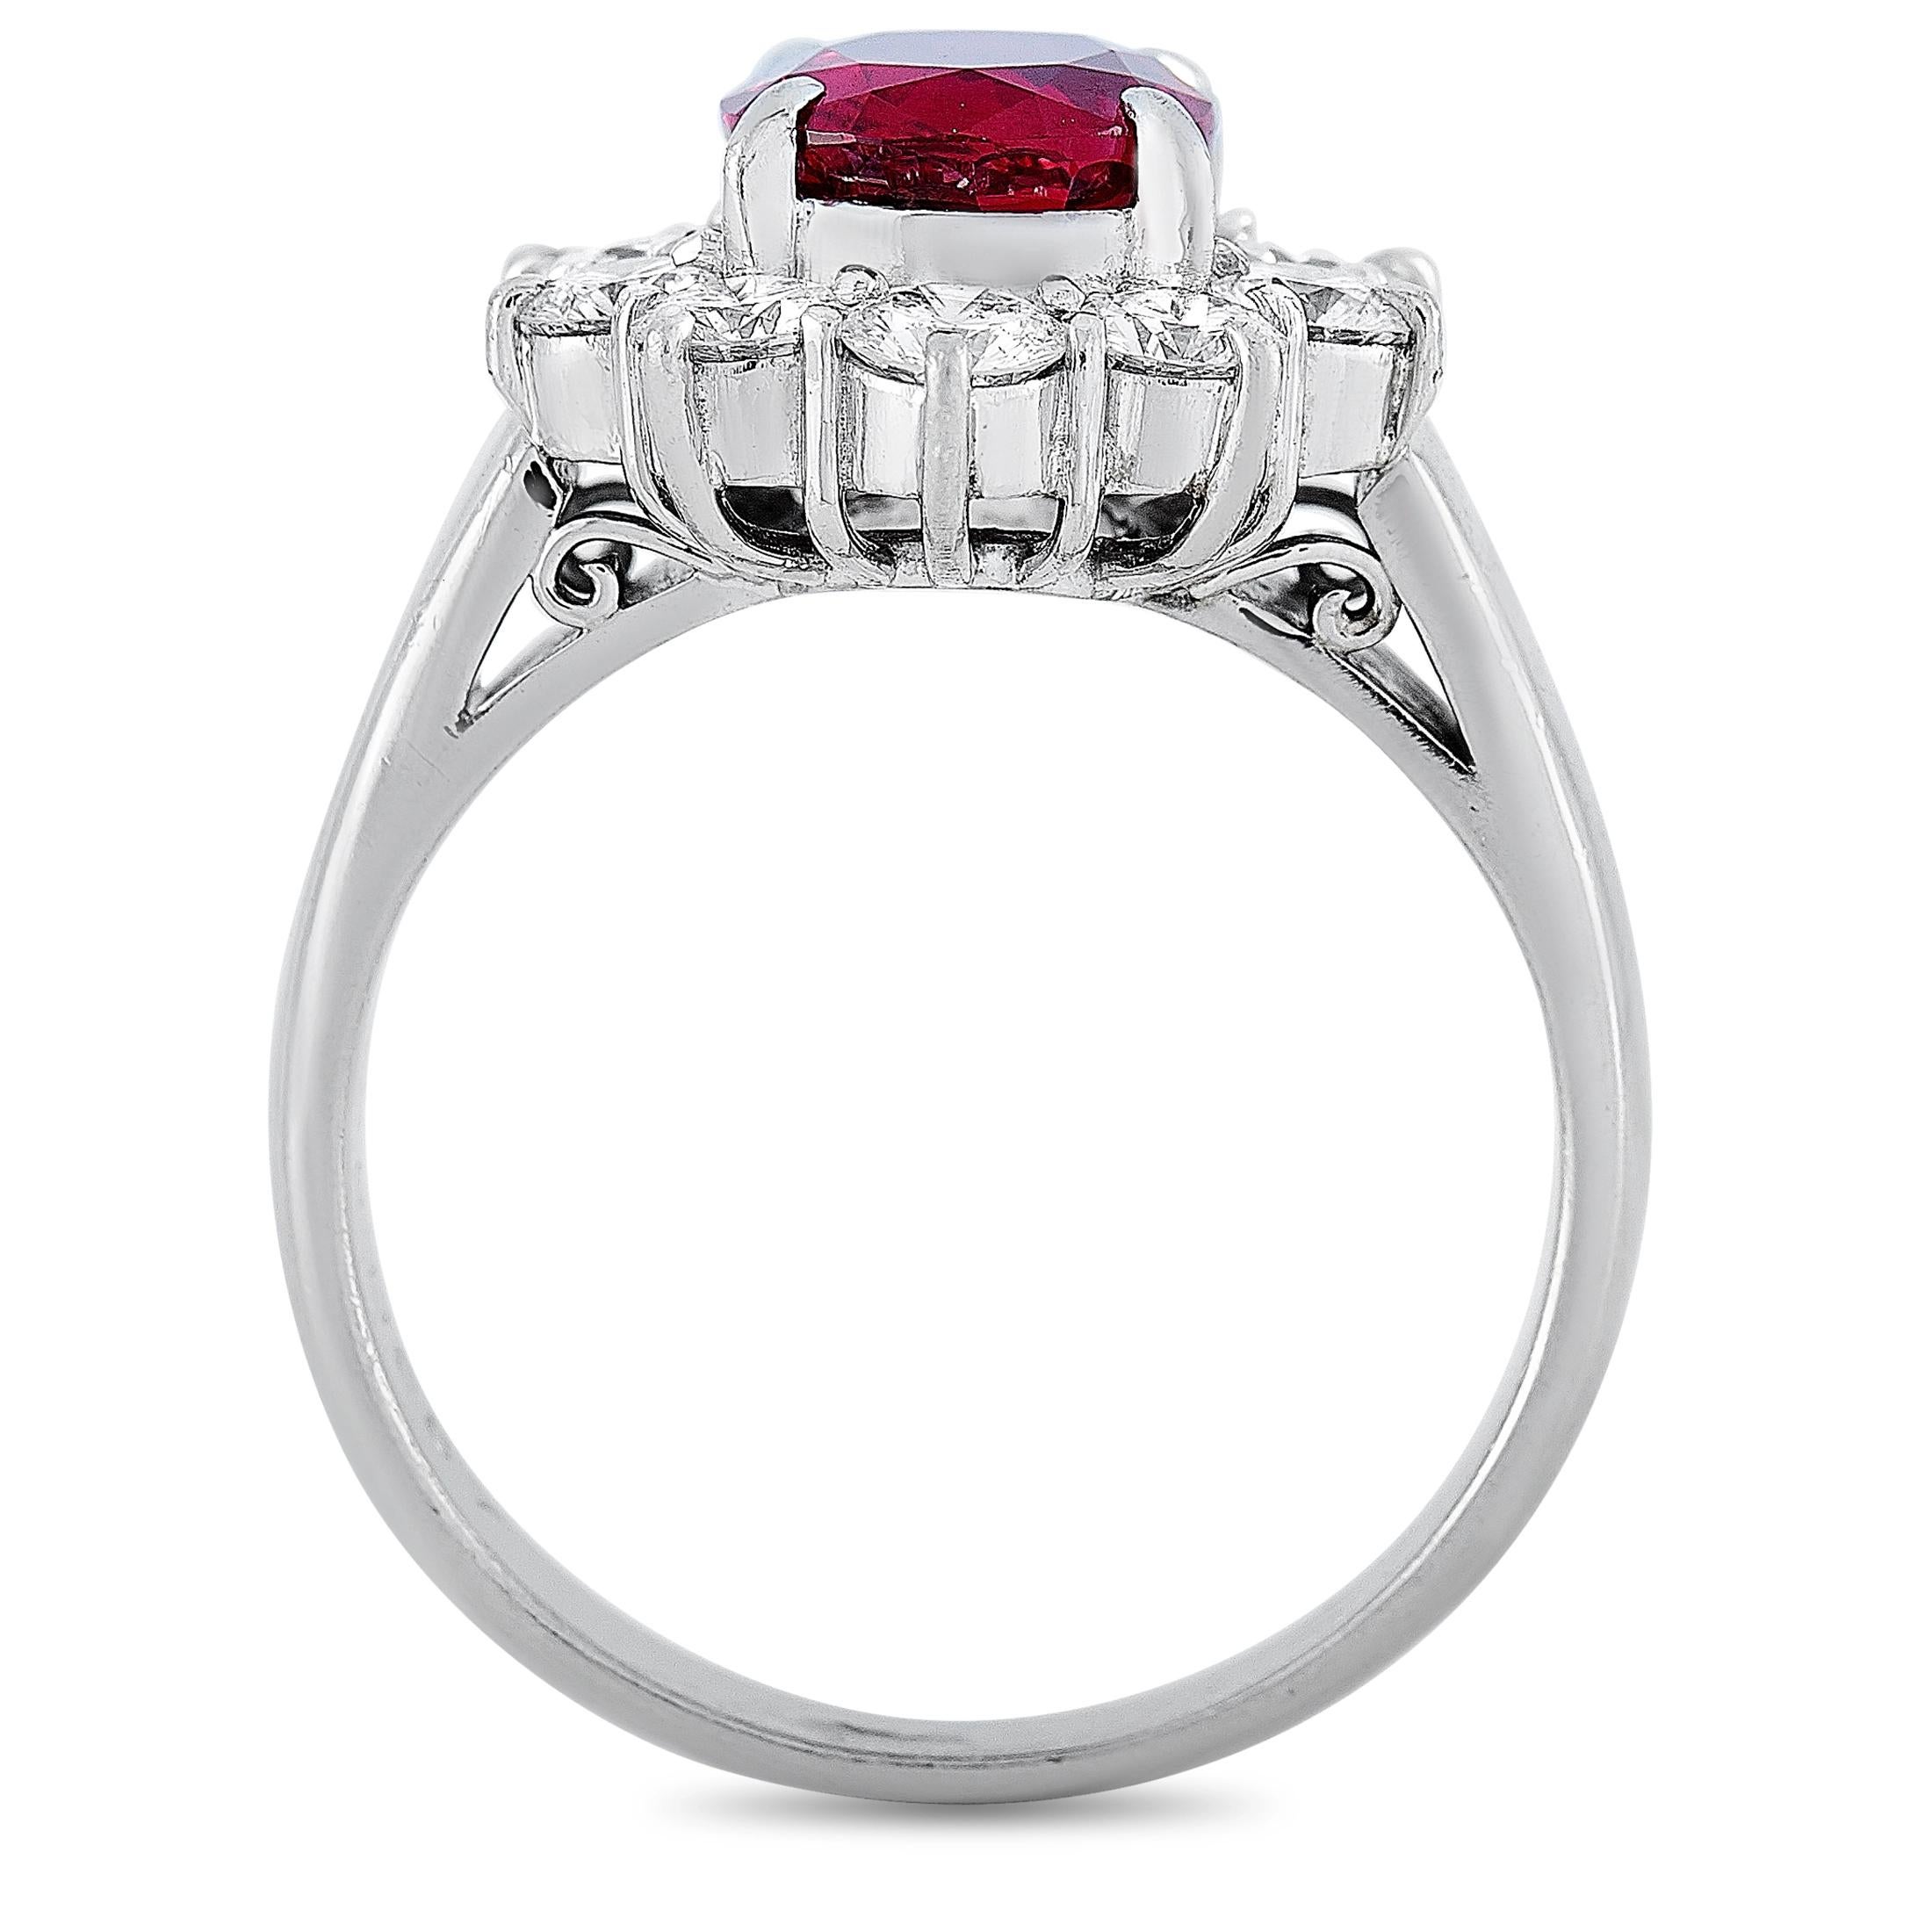 This LB Exclusive ring is crafted from platinum and weighs 6.7 grams, boasting band thickness of 2 mm and top height of 6 mm, while top dimensions measure 13 by 14 mm. The ring is set with a 1.40 ct ruby and a total of 0.87 carats of diamonds.
 
